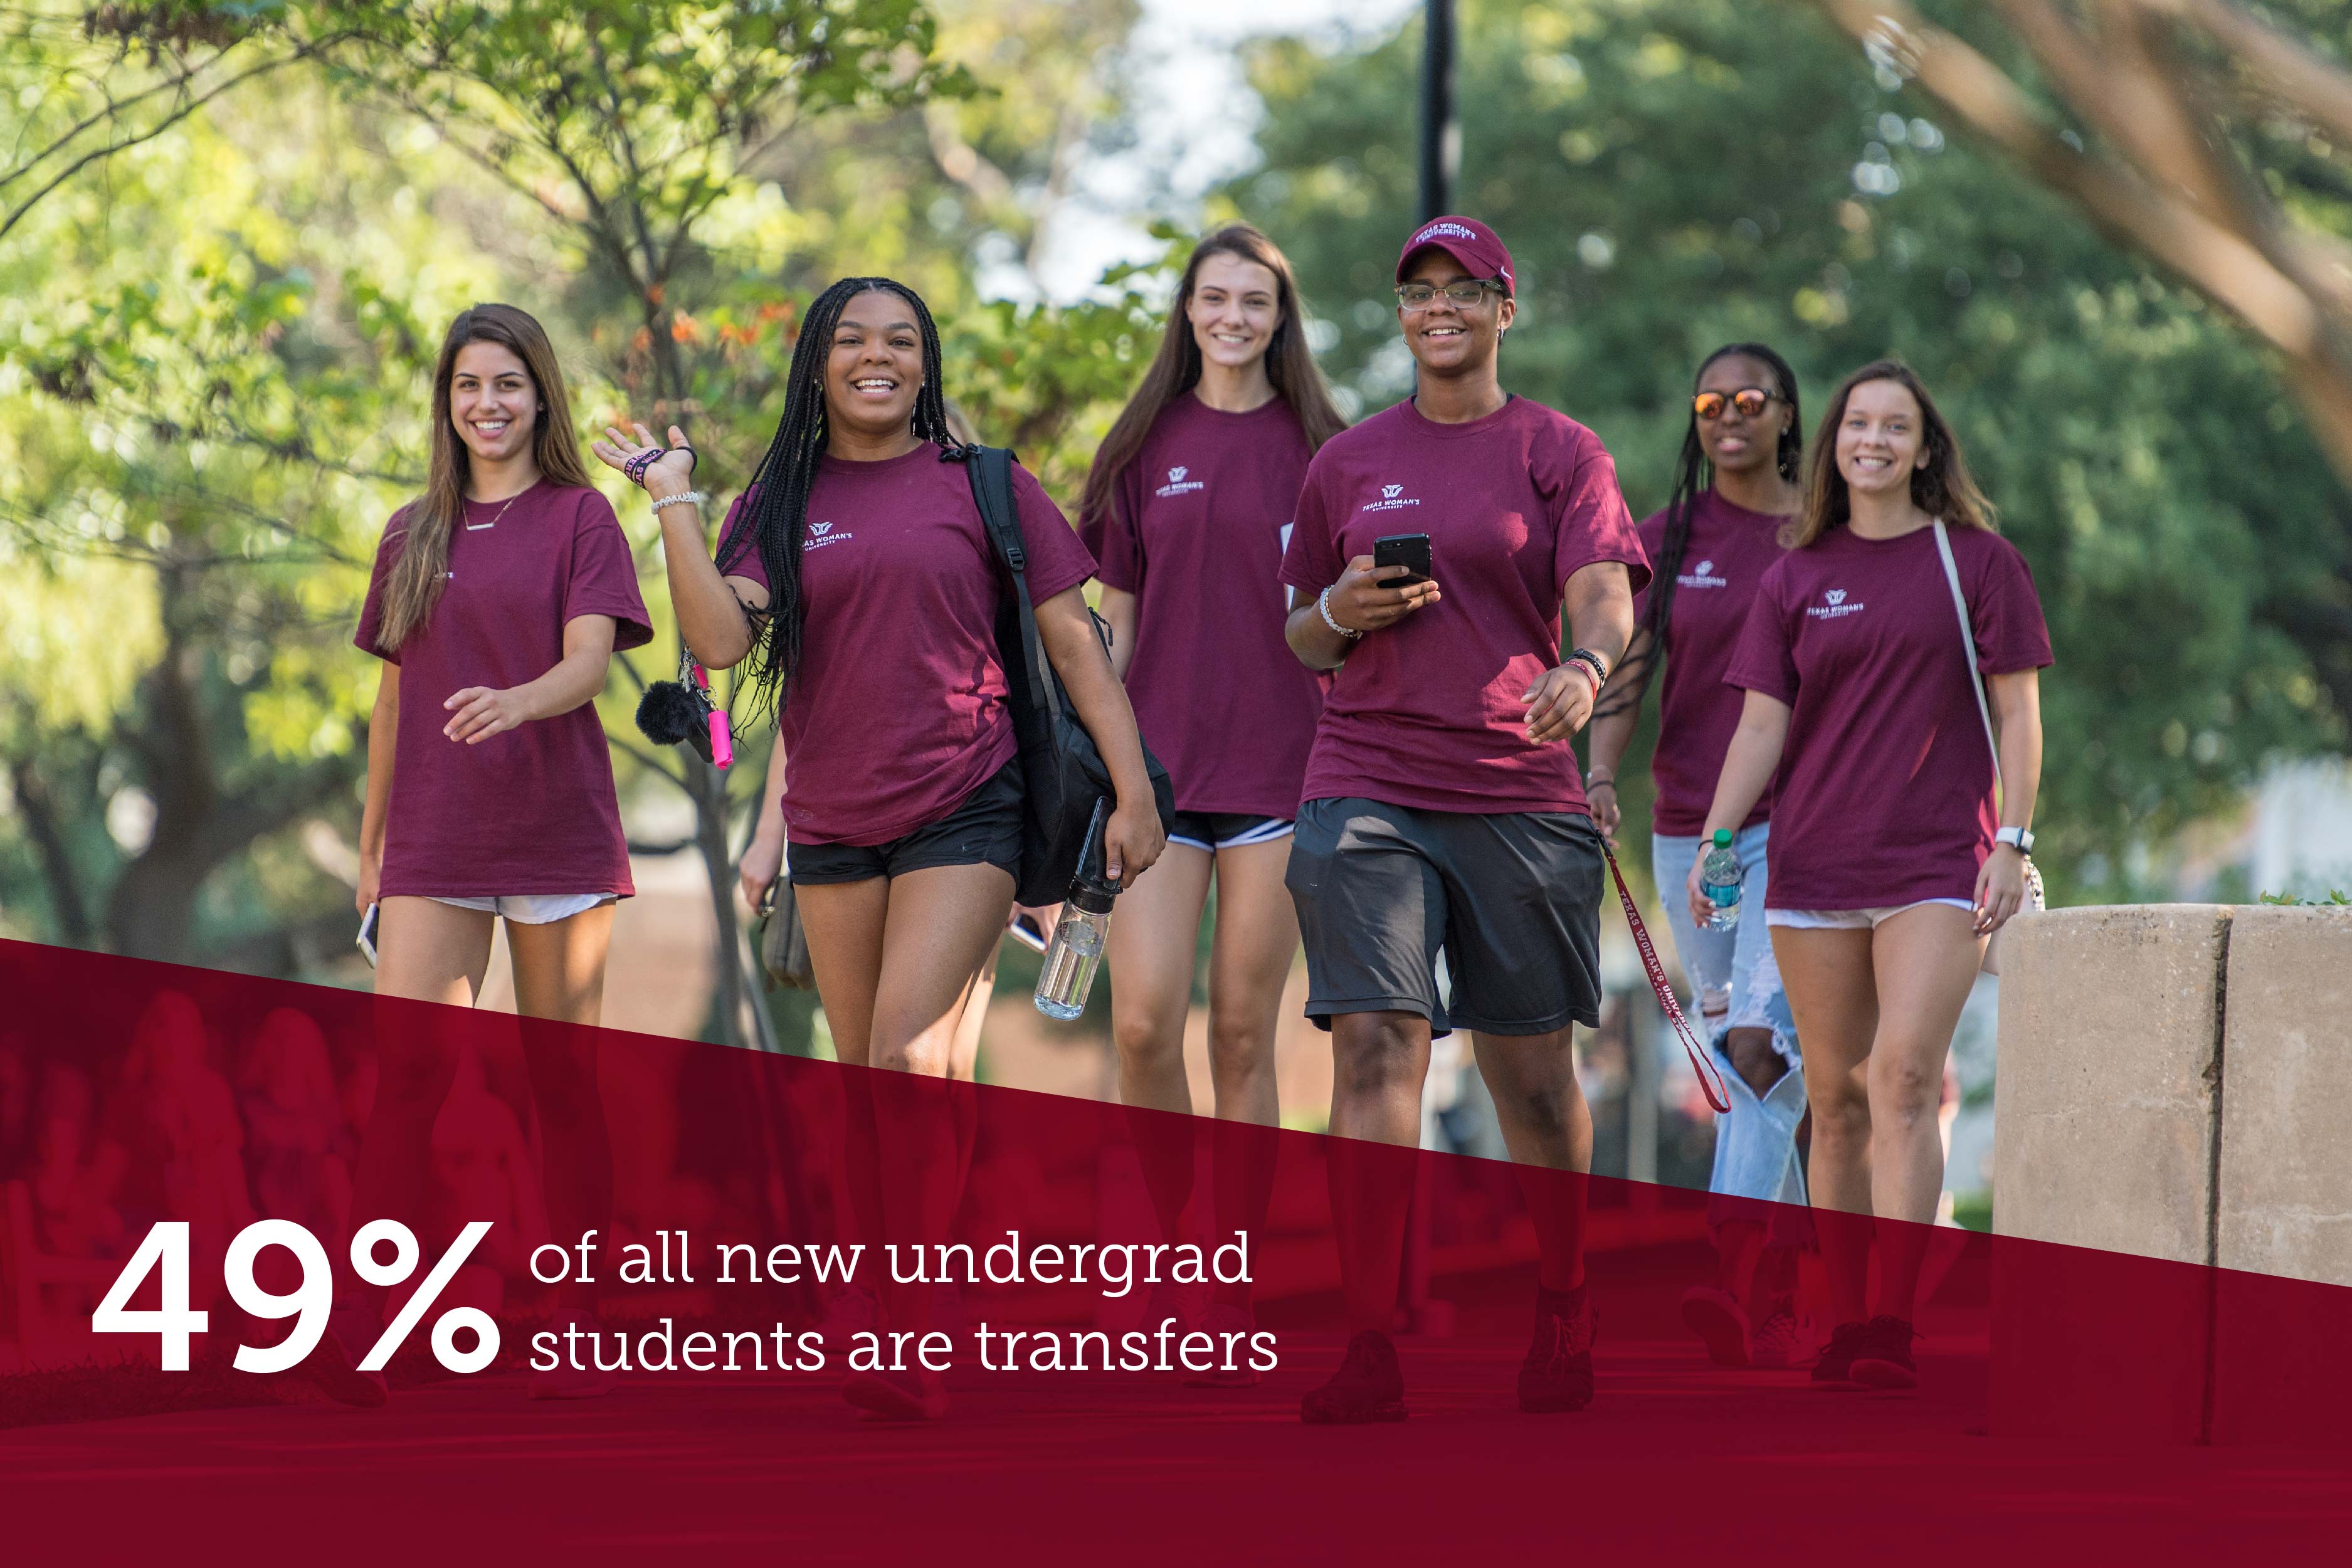 A group of TWU students relax on the lawn with university facts displayed below of 